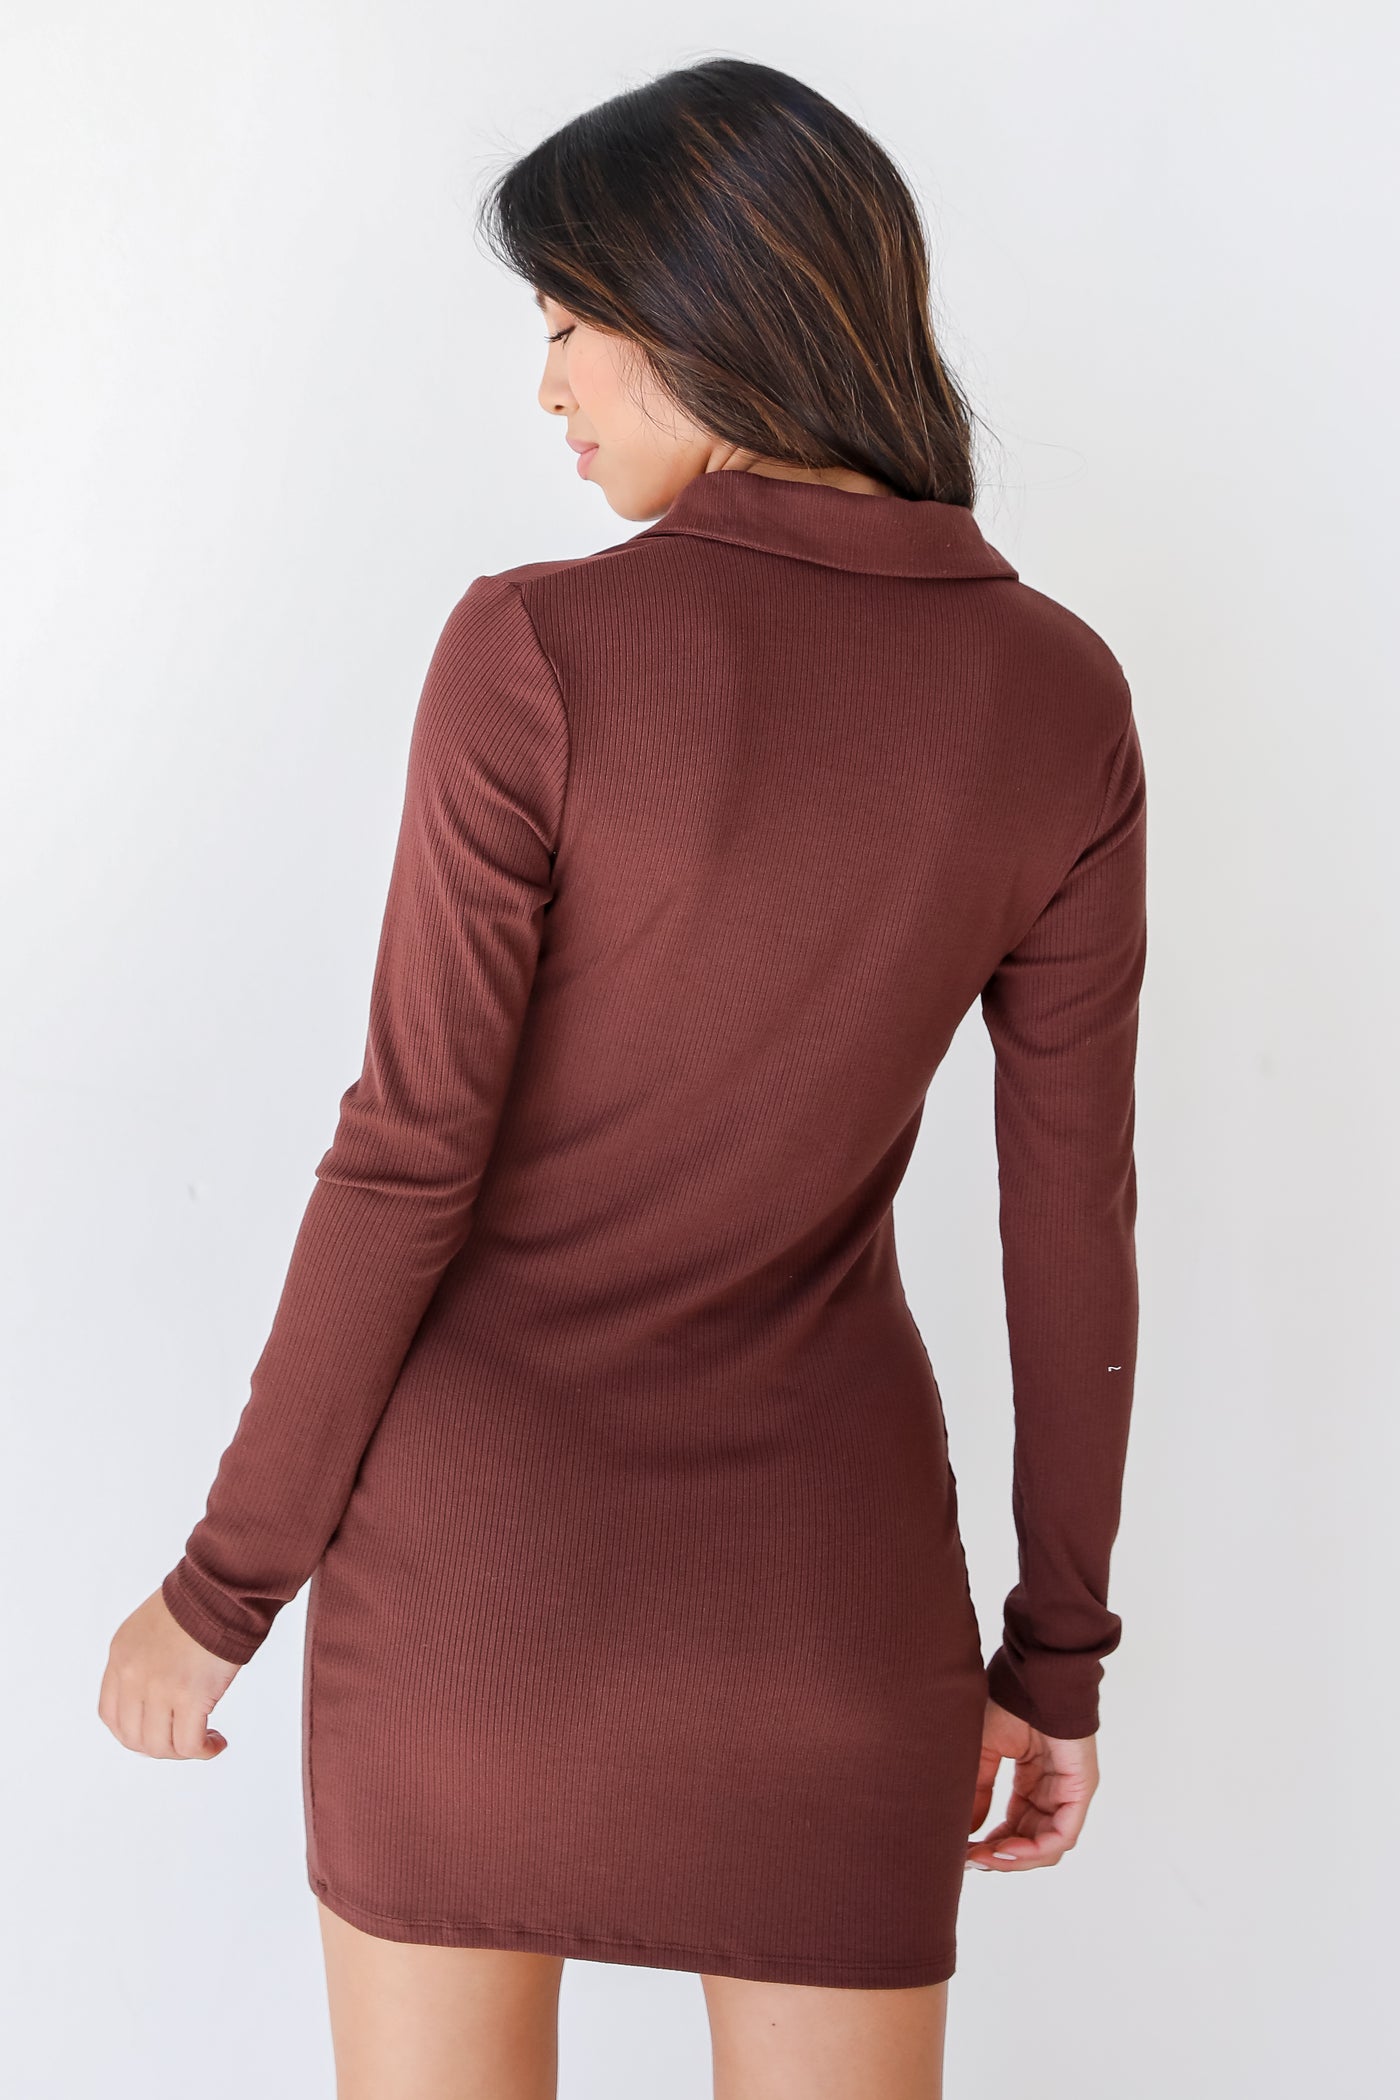 brown Ribbed Dress back view